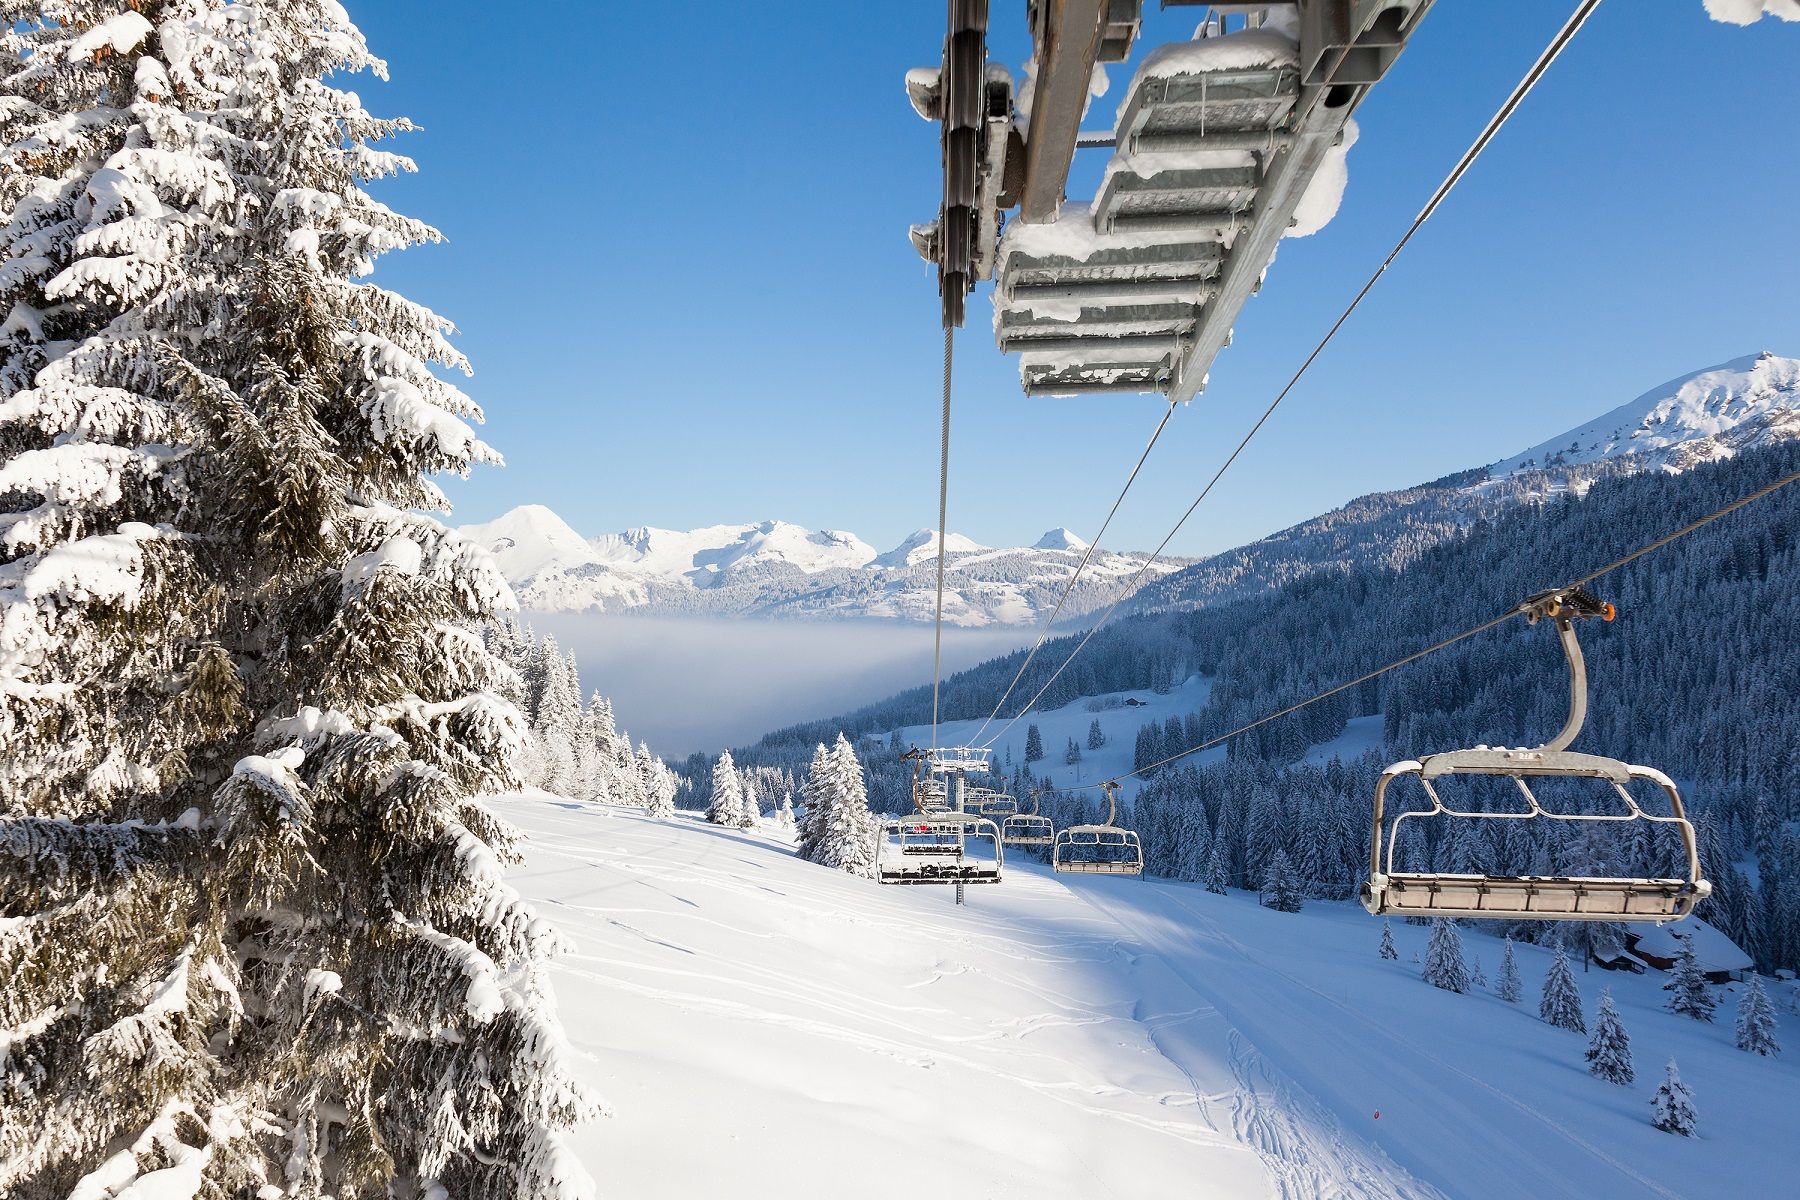 A ski lift climbing up a snowy mountain, with forests around, mountains in the distance and a fog rising.